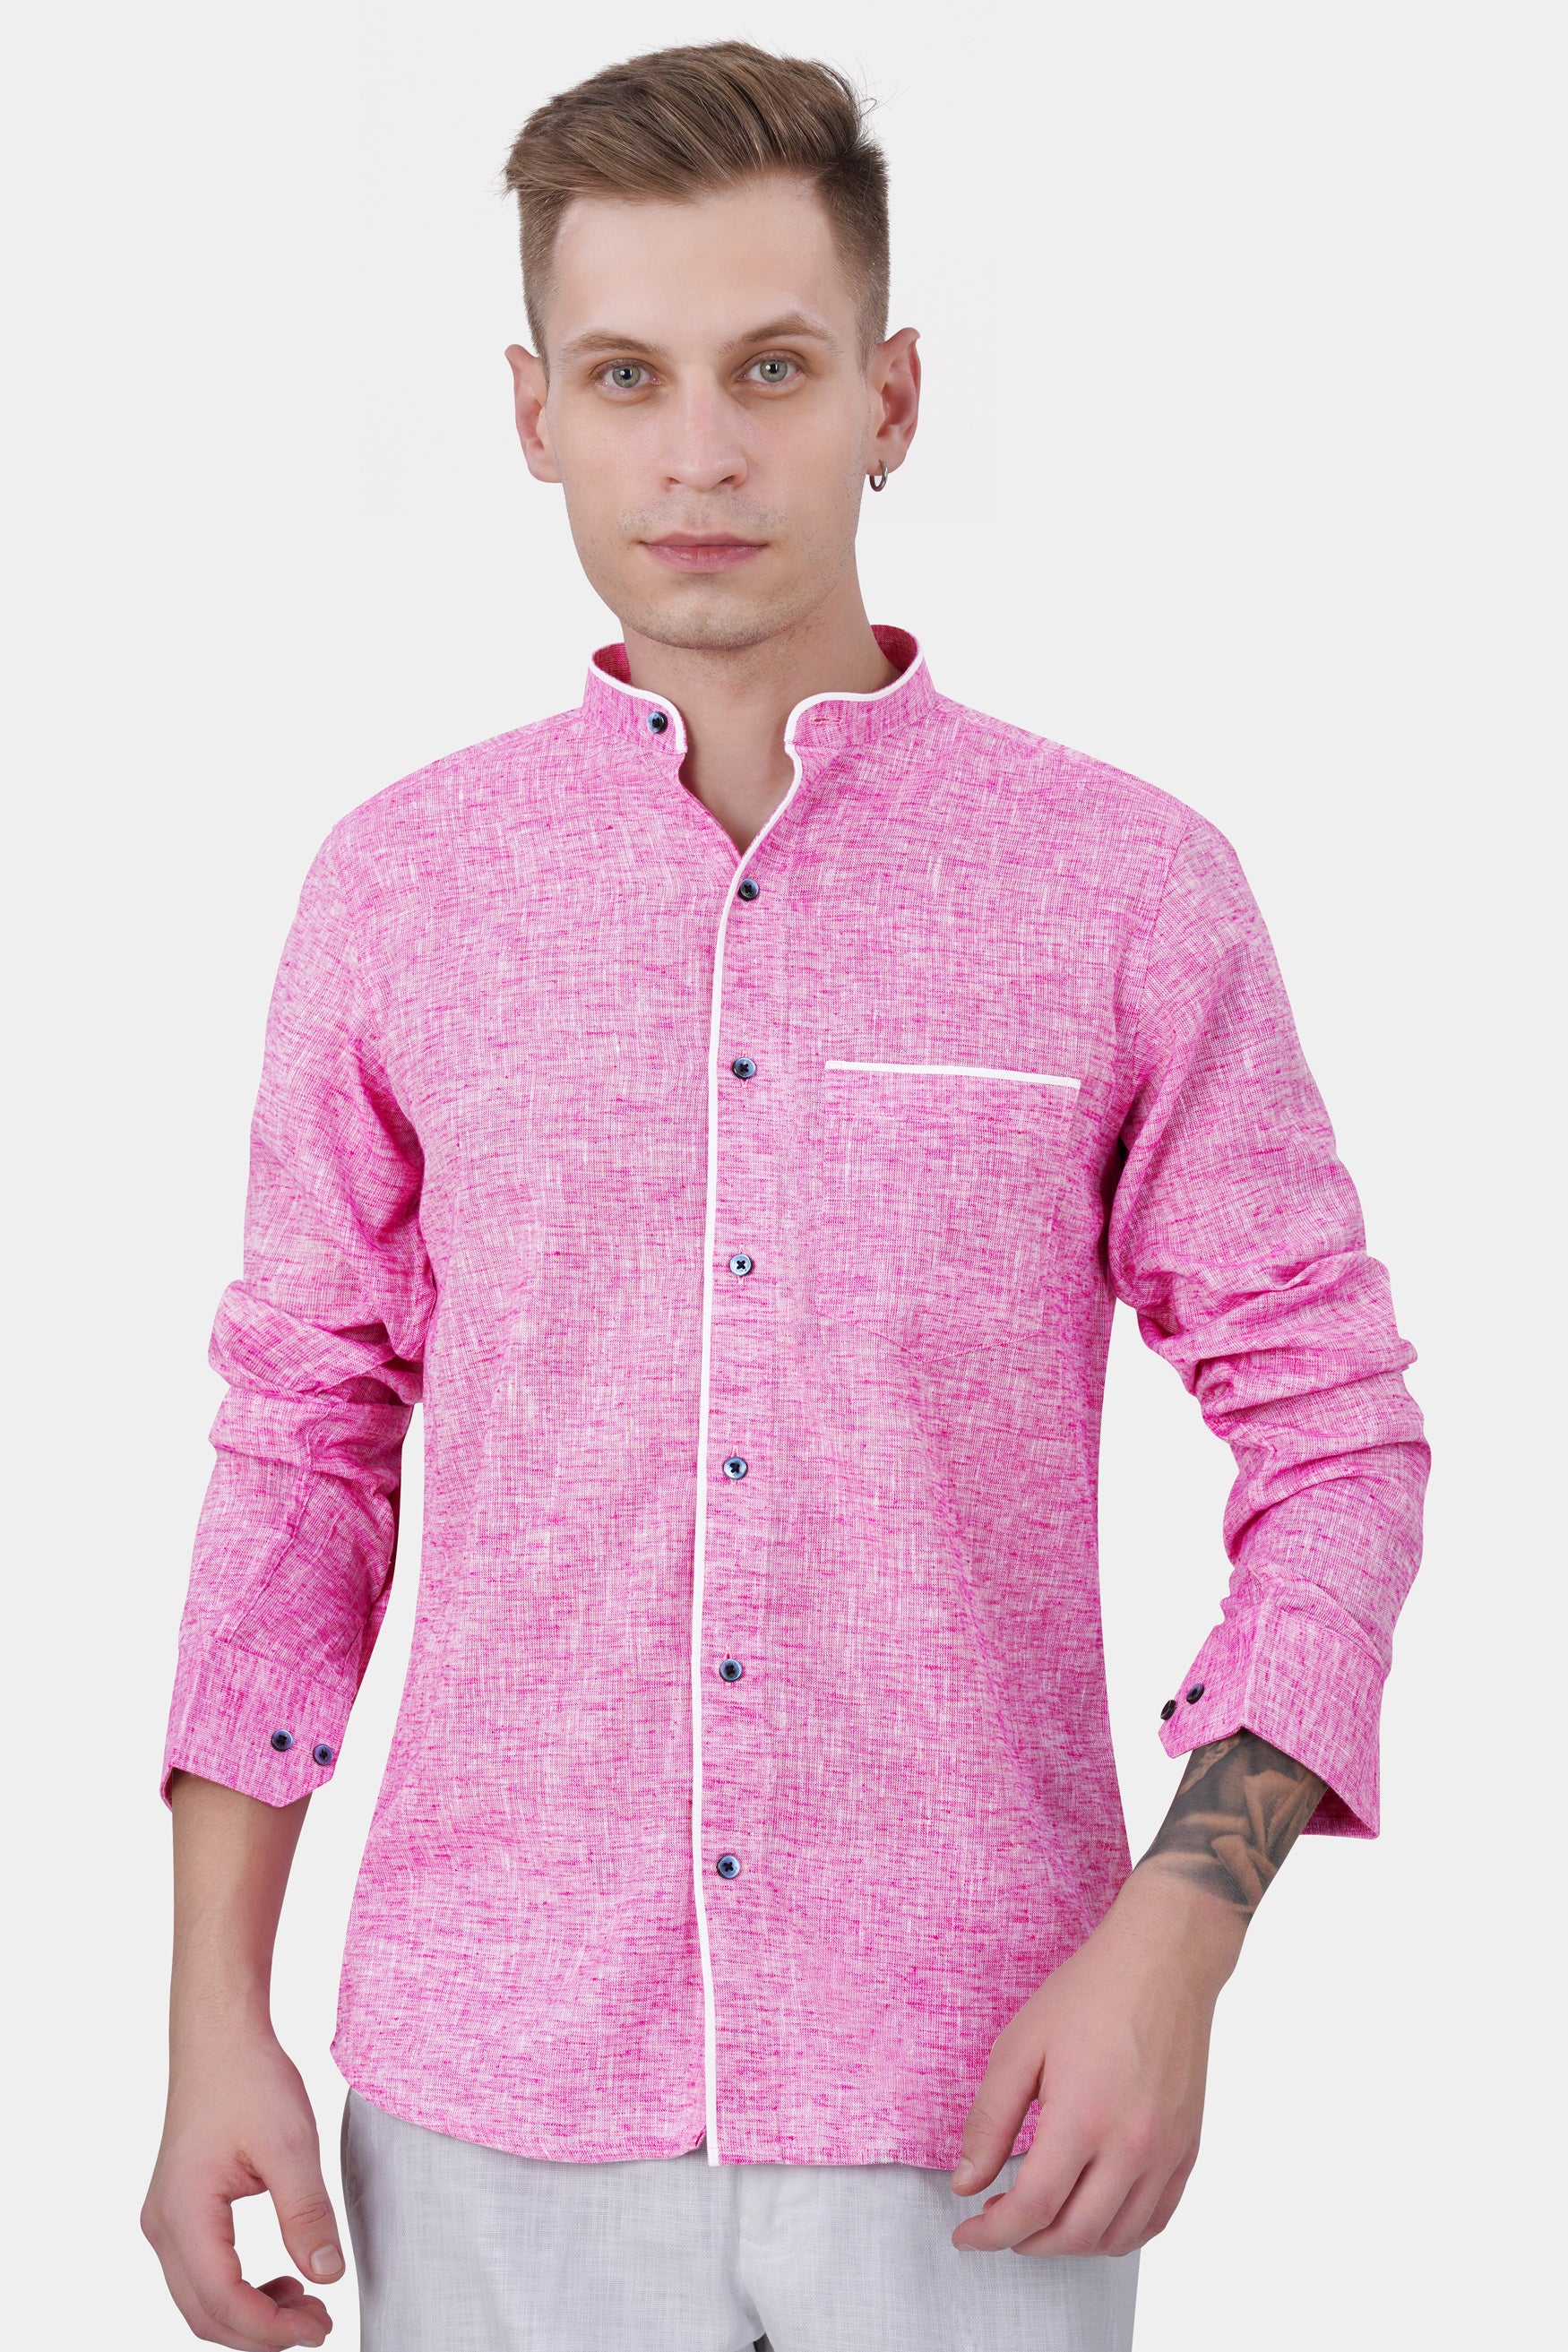 Chantilly Pink with White Piping Work Luxurious Linen Designer Shirt 11707-M-BLE-PIPING-38, 11707-M-BLE-PIPING-H-38, 11707-M-BLE-PIPING-39, 11707-M-BLE-PIPING-H-39, 11707-M-BLE-PIPING-40, 11707-M-BLE-PIPING-H-40, 11707-M-BLE-PIPING-42, 11707-M-BLE-PIPING-H-42, 11707-M-BLE-PIPING-44, 11707-M-BLE-PIPING-H-44, 11707-M-BLE-PIPING-46, 11707-M-BLE-PIPING-H-46, 11707-M-BLE-PIPING-48, 11707-M-BLE-PIPING-H-48, 11707-M-BLE-PIPING-50, 11707-M-BLE-PIPING-H-50, 11707-M-BLE-PIPING-52, 11707-M-BLE-PIPING-H-52